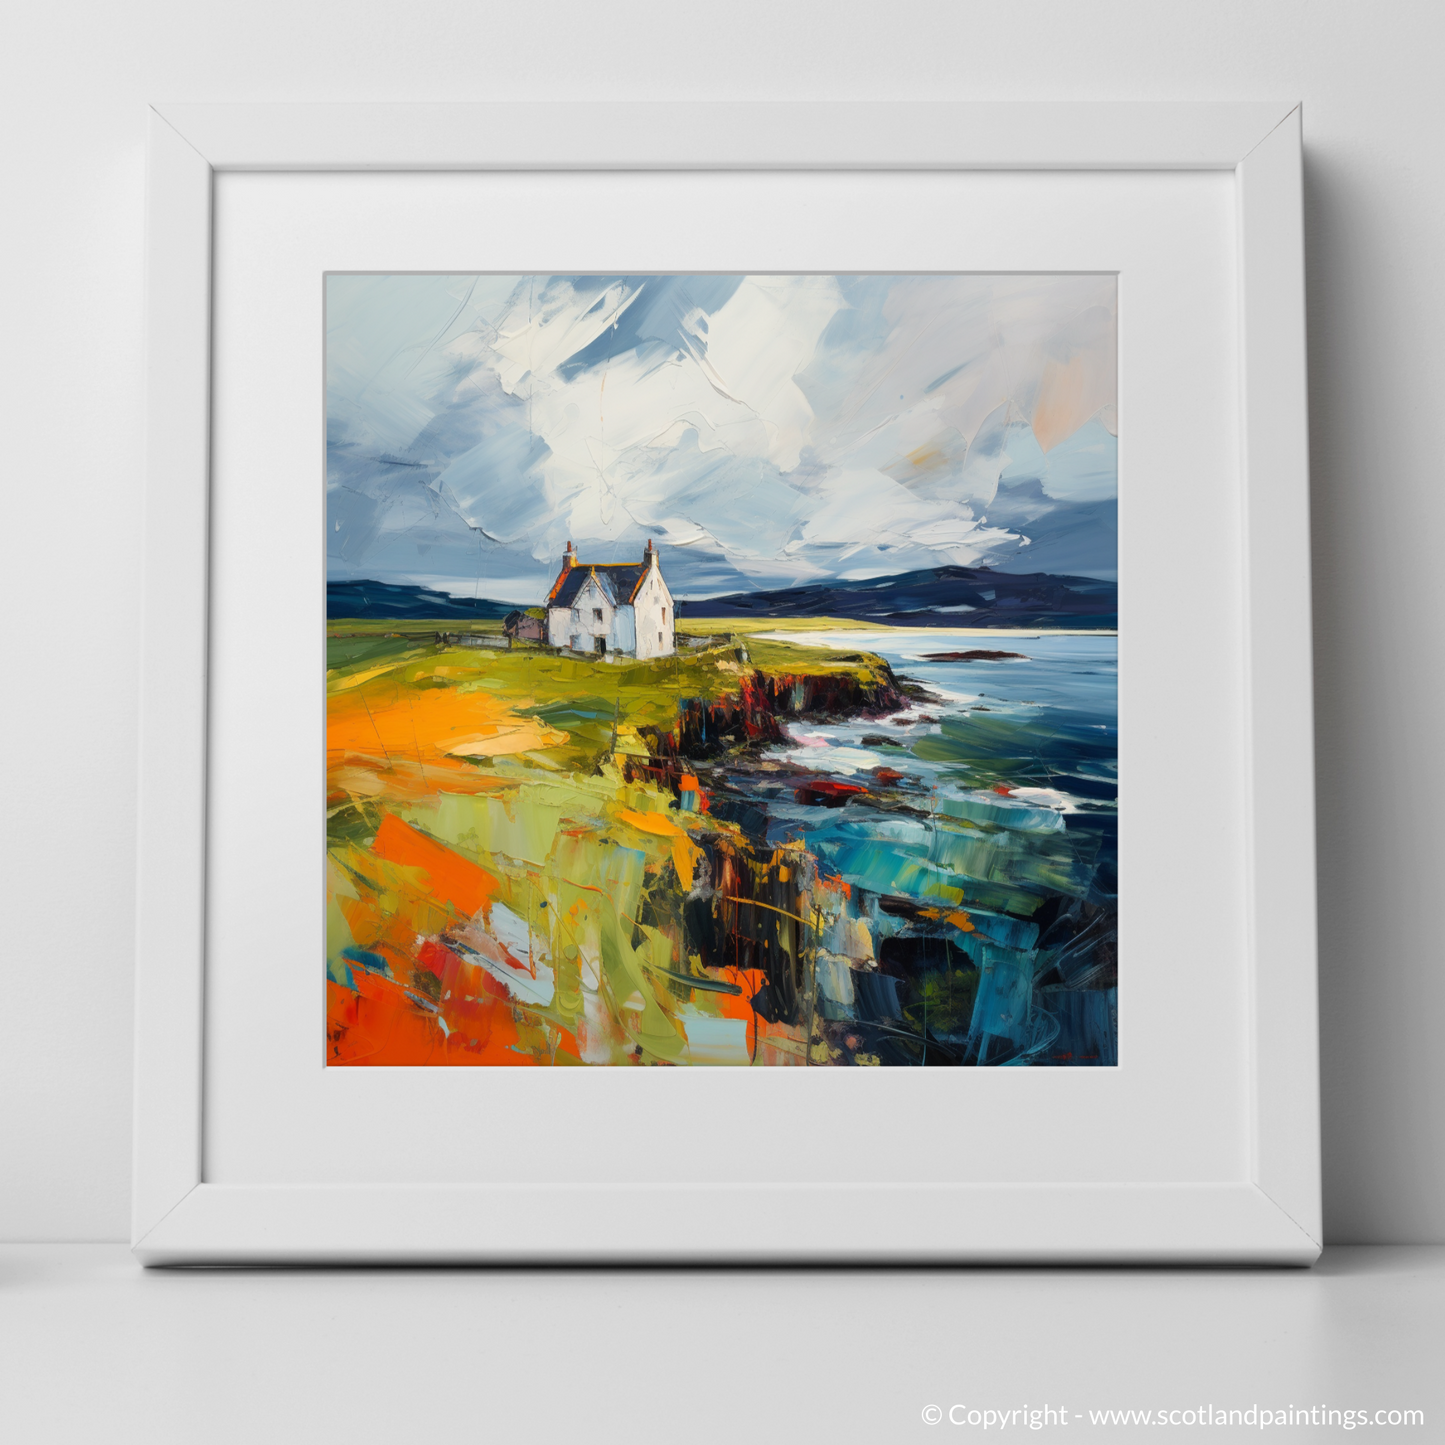 Art Print of Orkney, North of mainland Scotland with a white frame